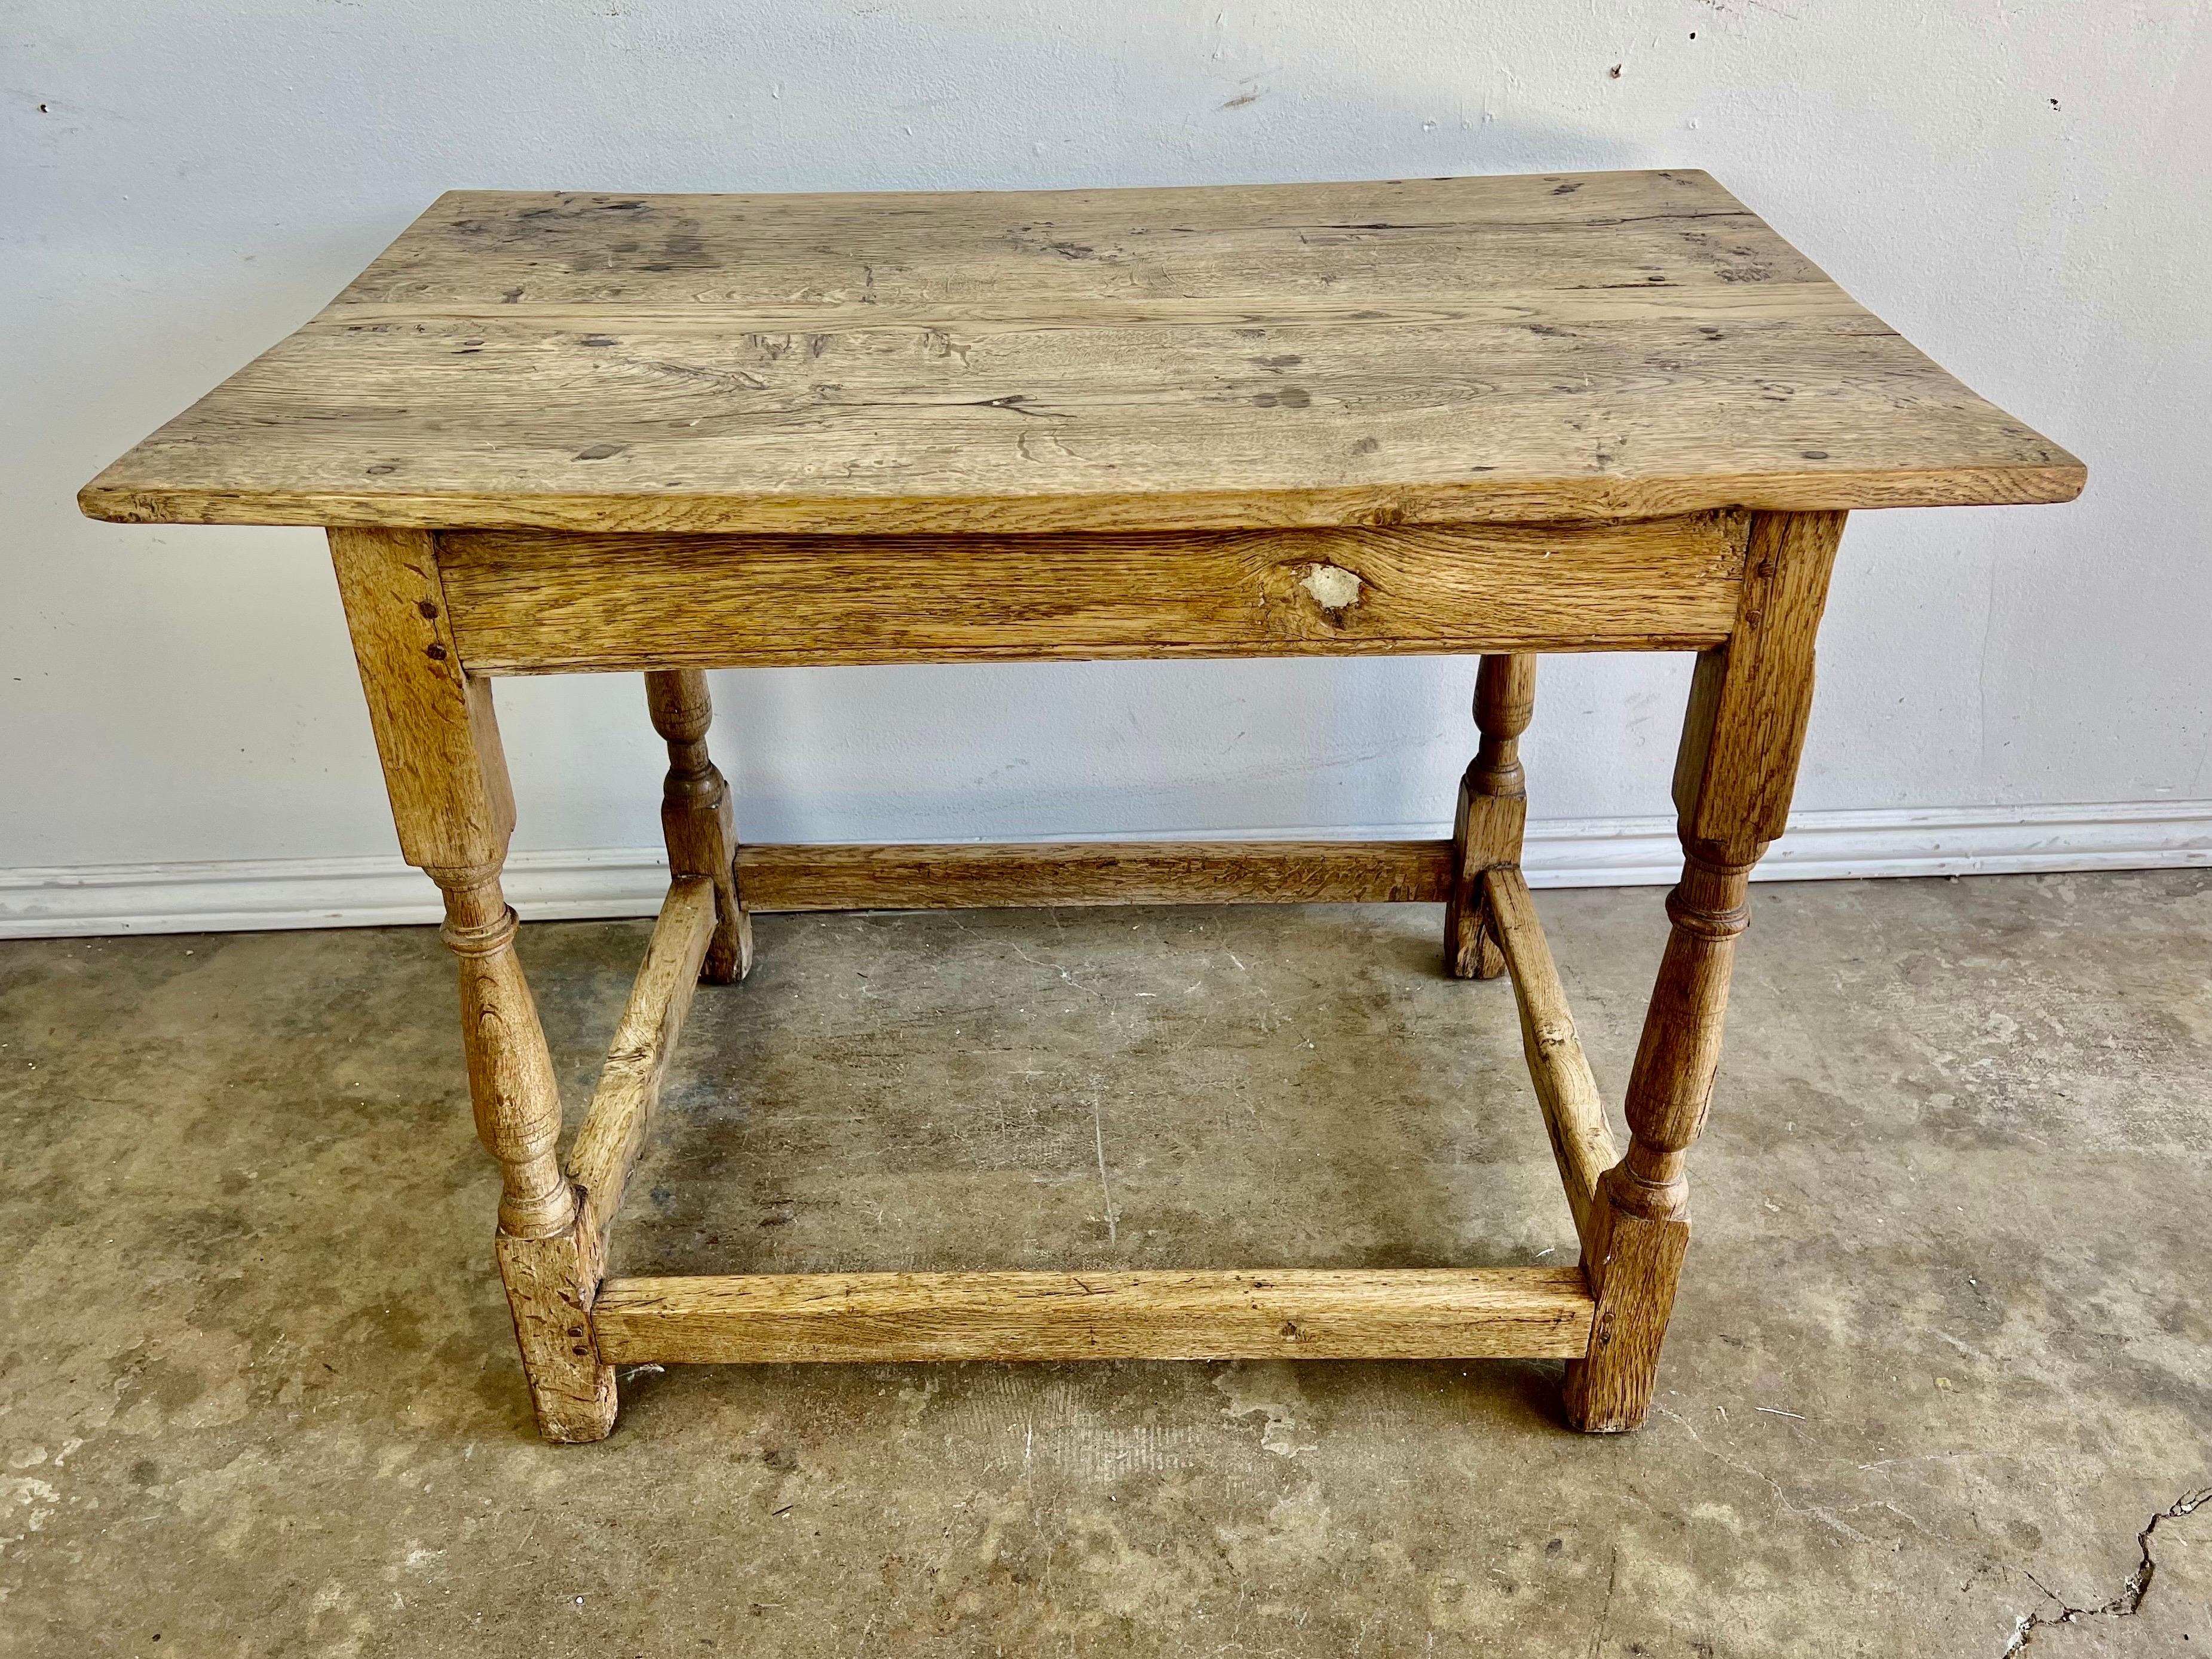 Rectangular shaped rustic bleached oak side table with bottom stretcher.